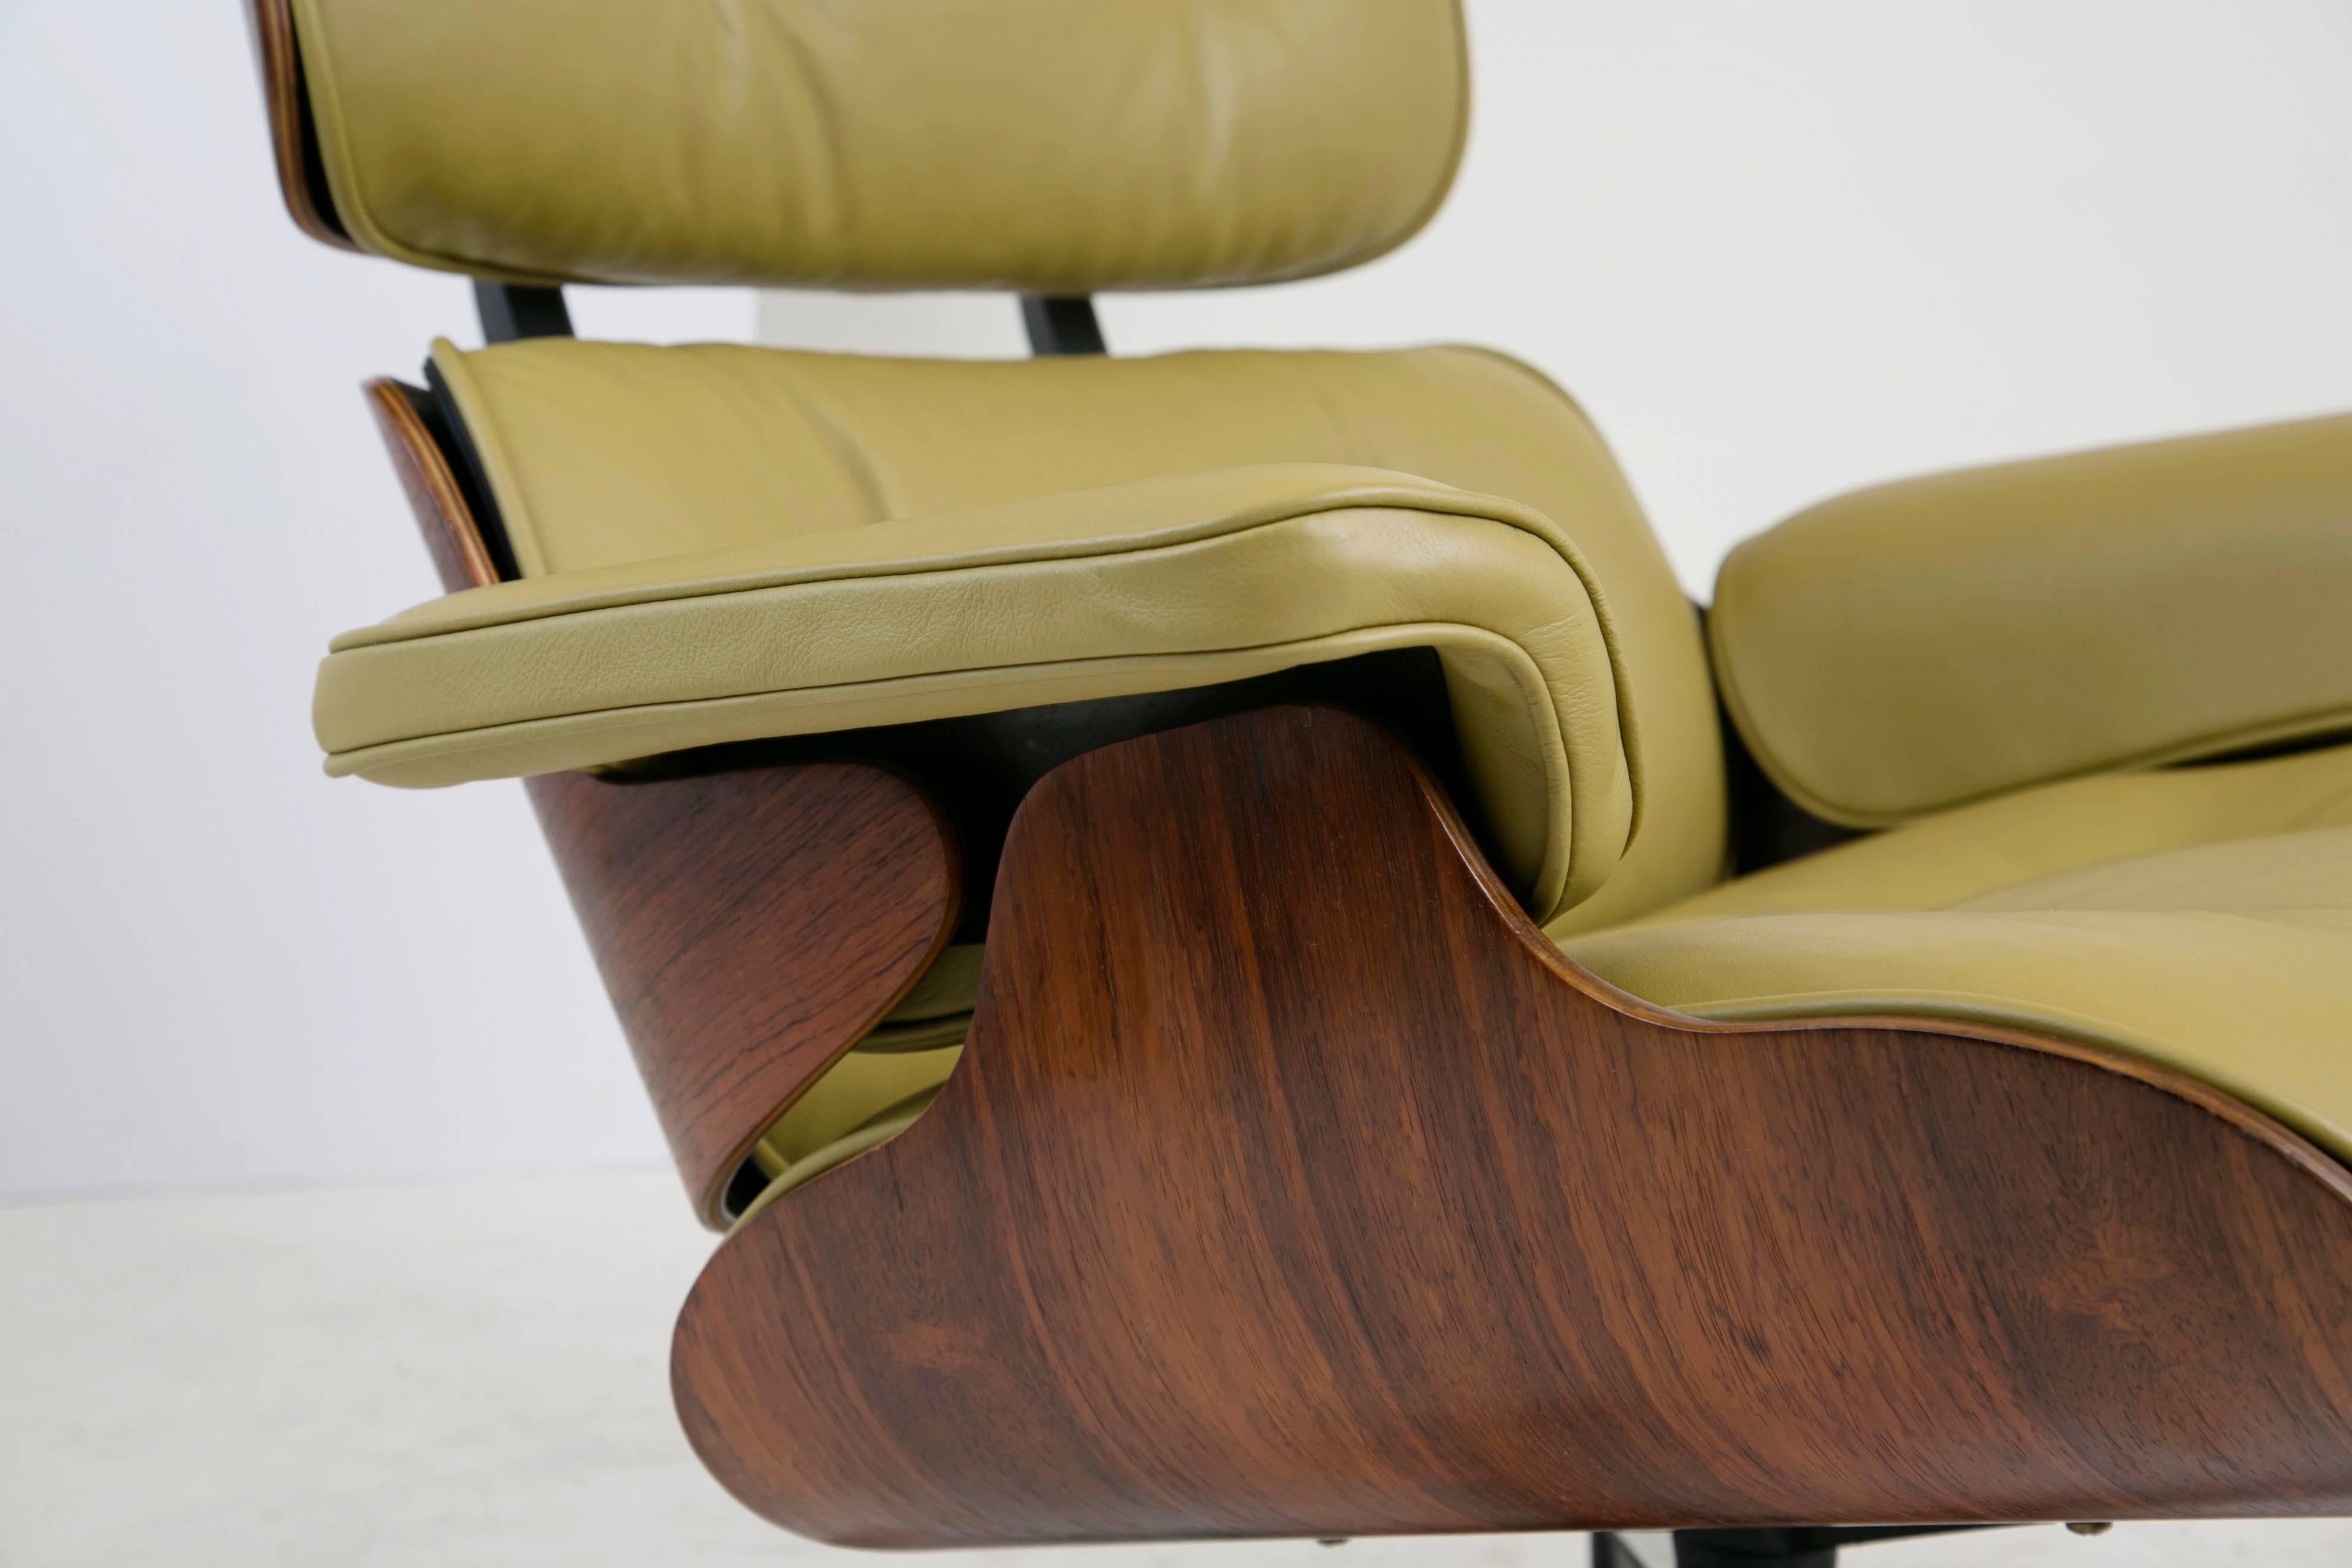 Early Production Model 670/671 Lounge Chair & Ottoman by Charles & Ray Eames 1